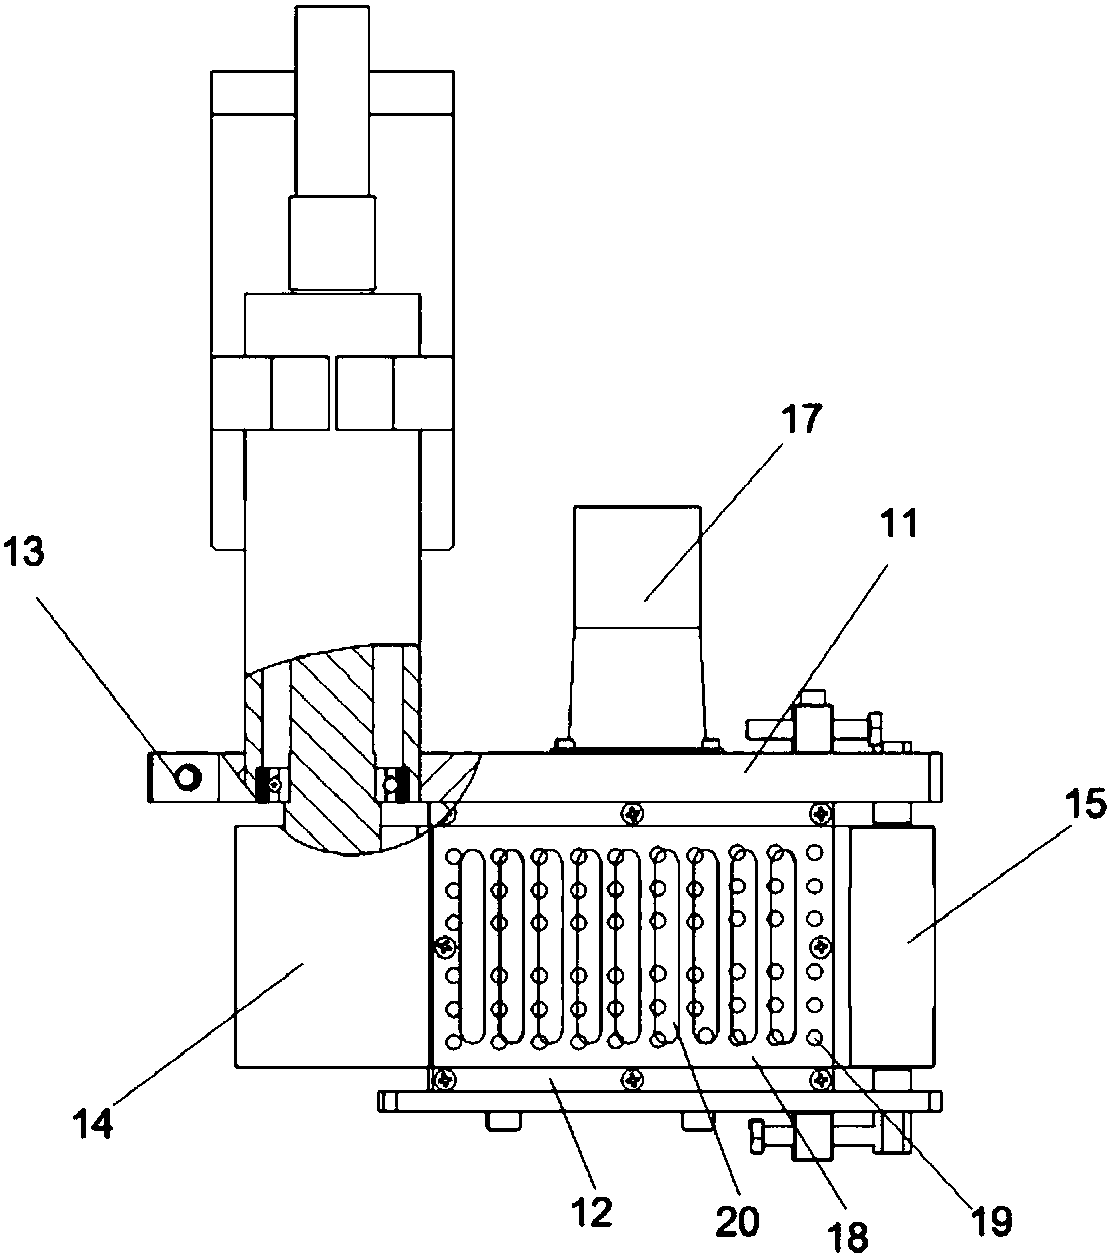 Release paper suction feeding and cutting applying device